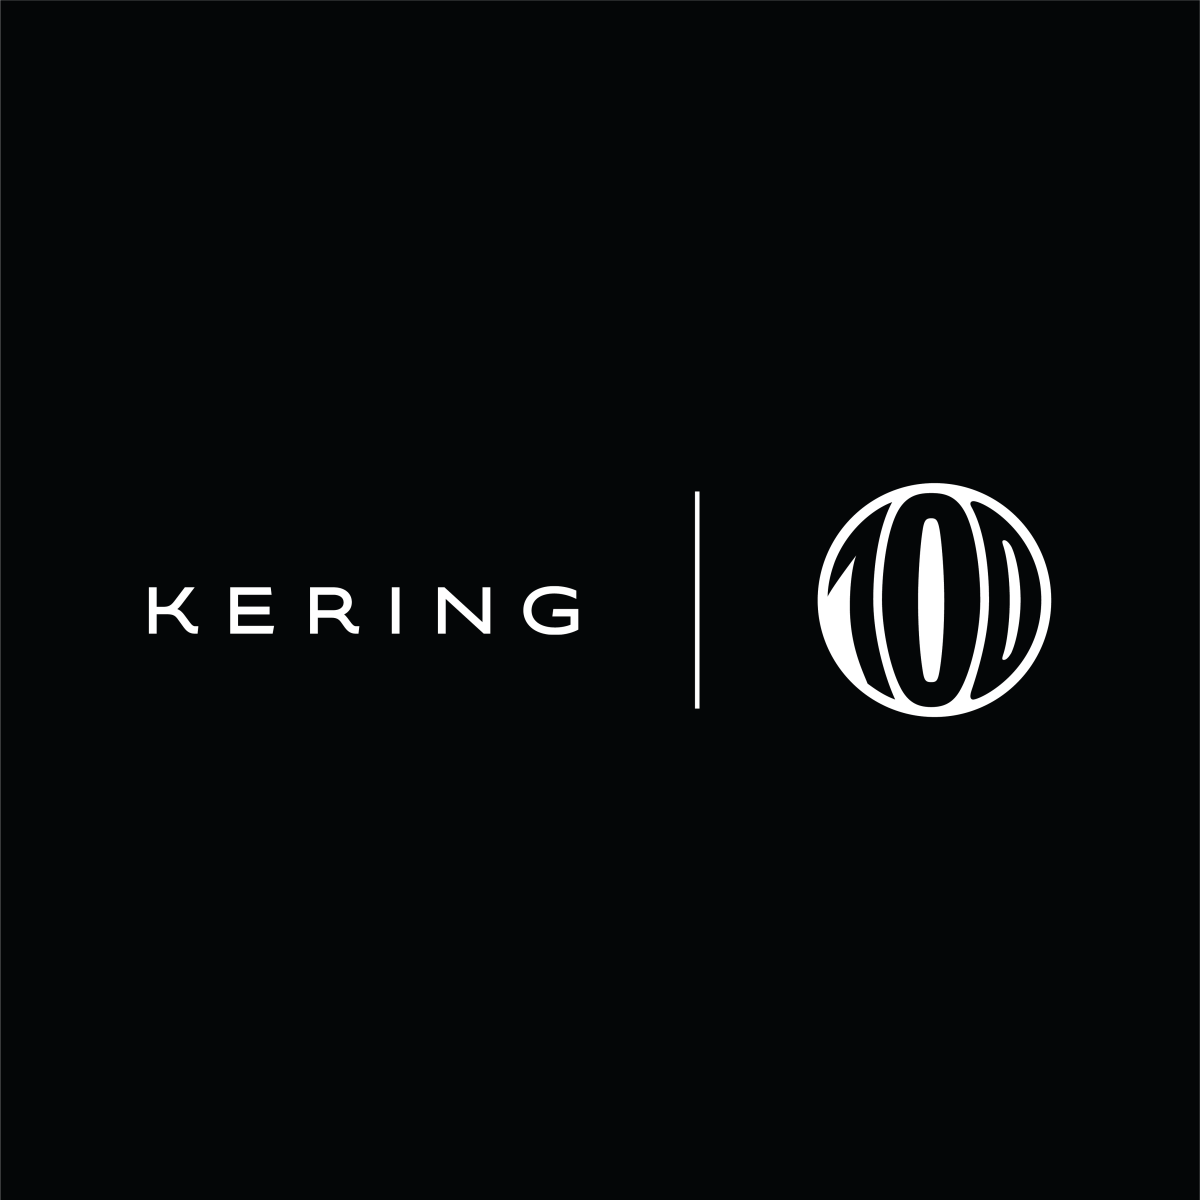 Kering Scales Up Diversity, Inclusion at Regional Levels